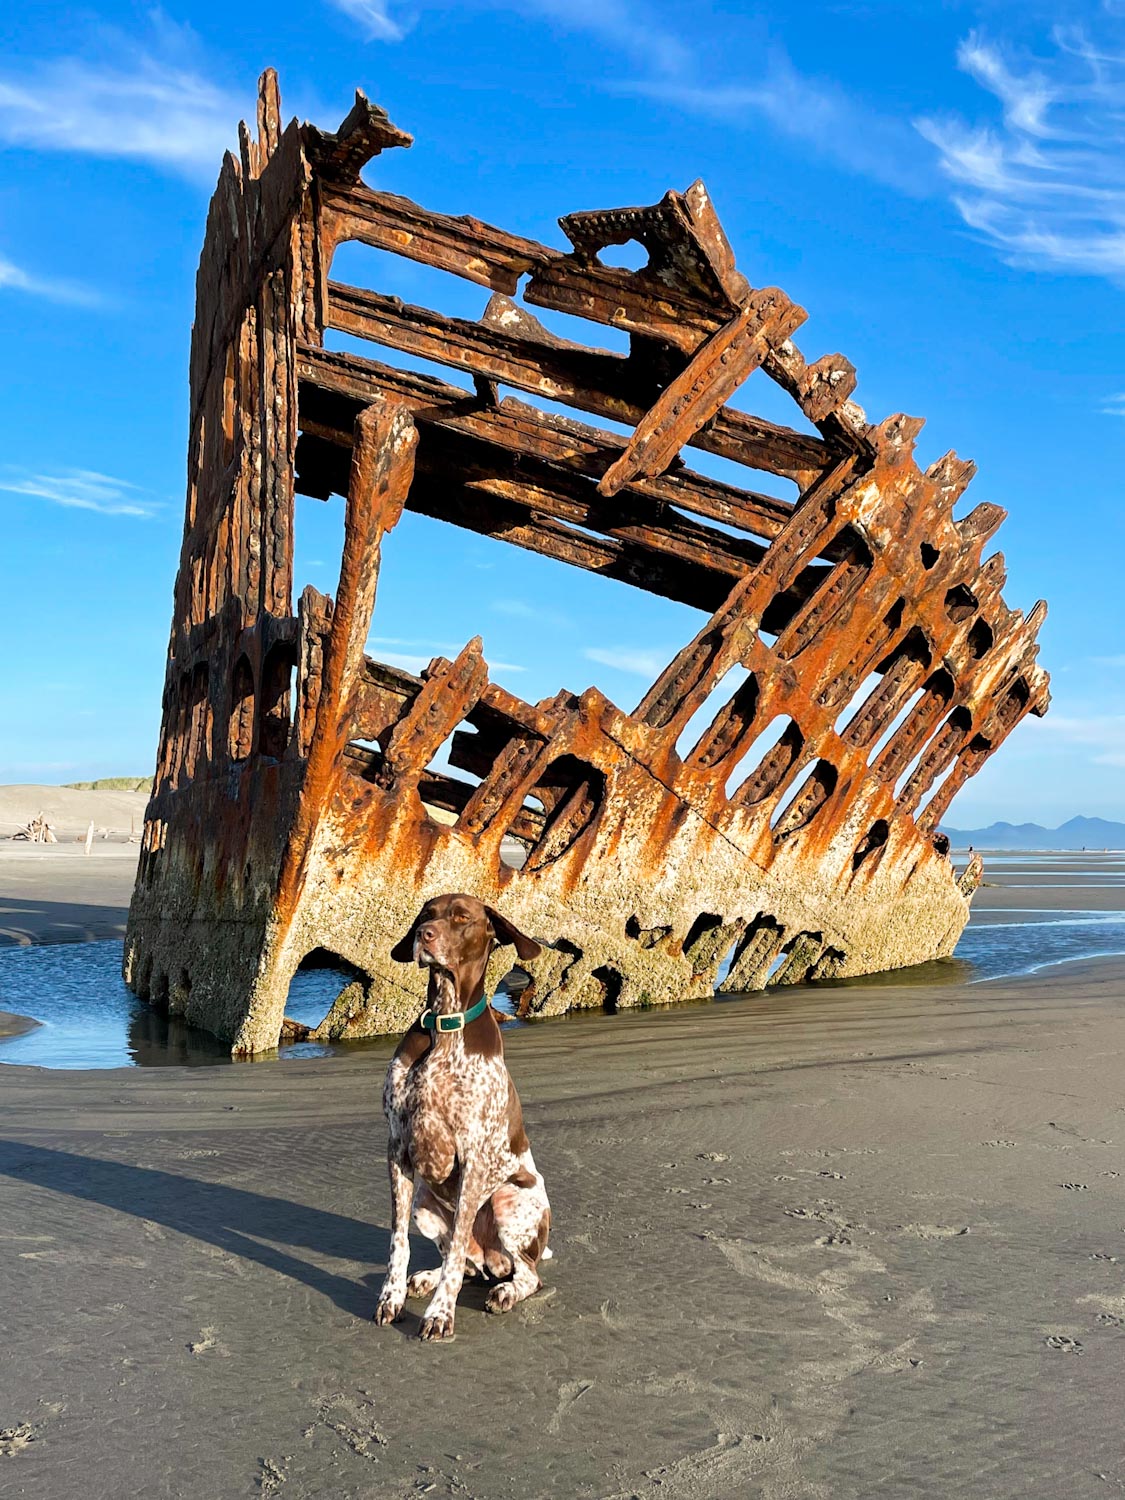 German Shorthaired Pointer sitting in front of the Wreck of the Peter Iredale